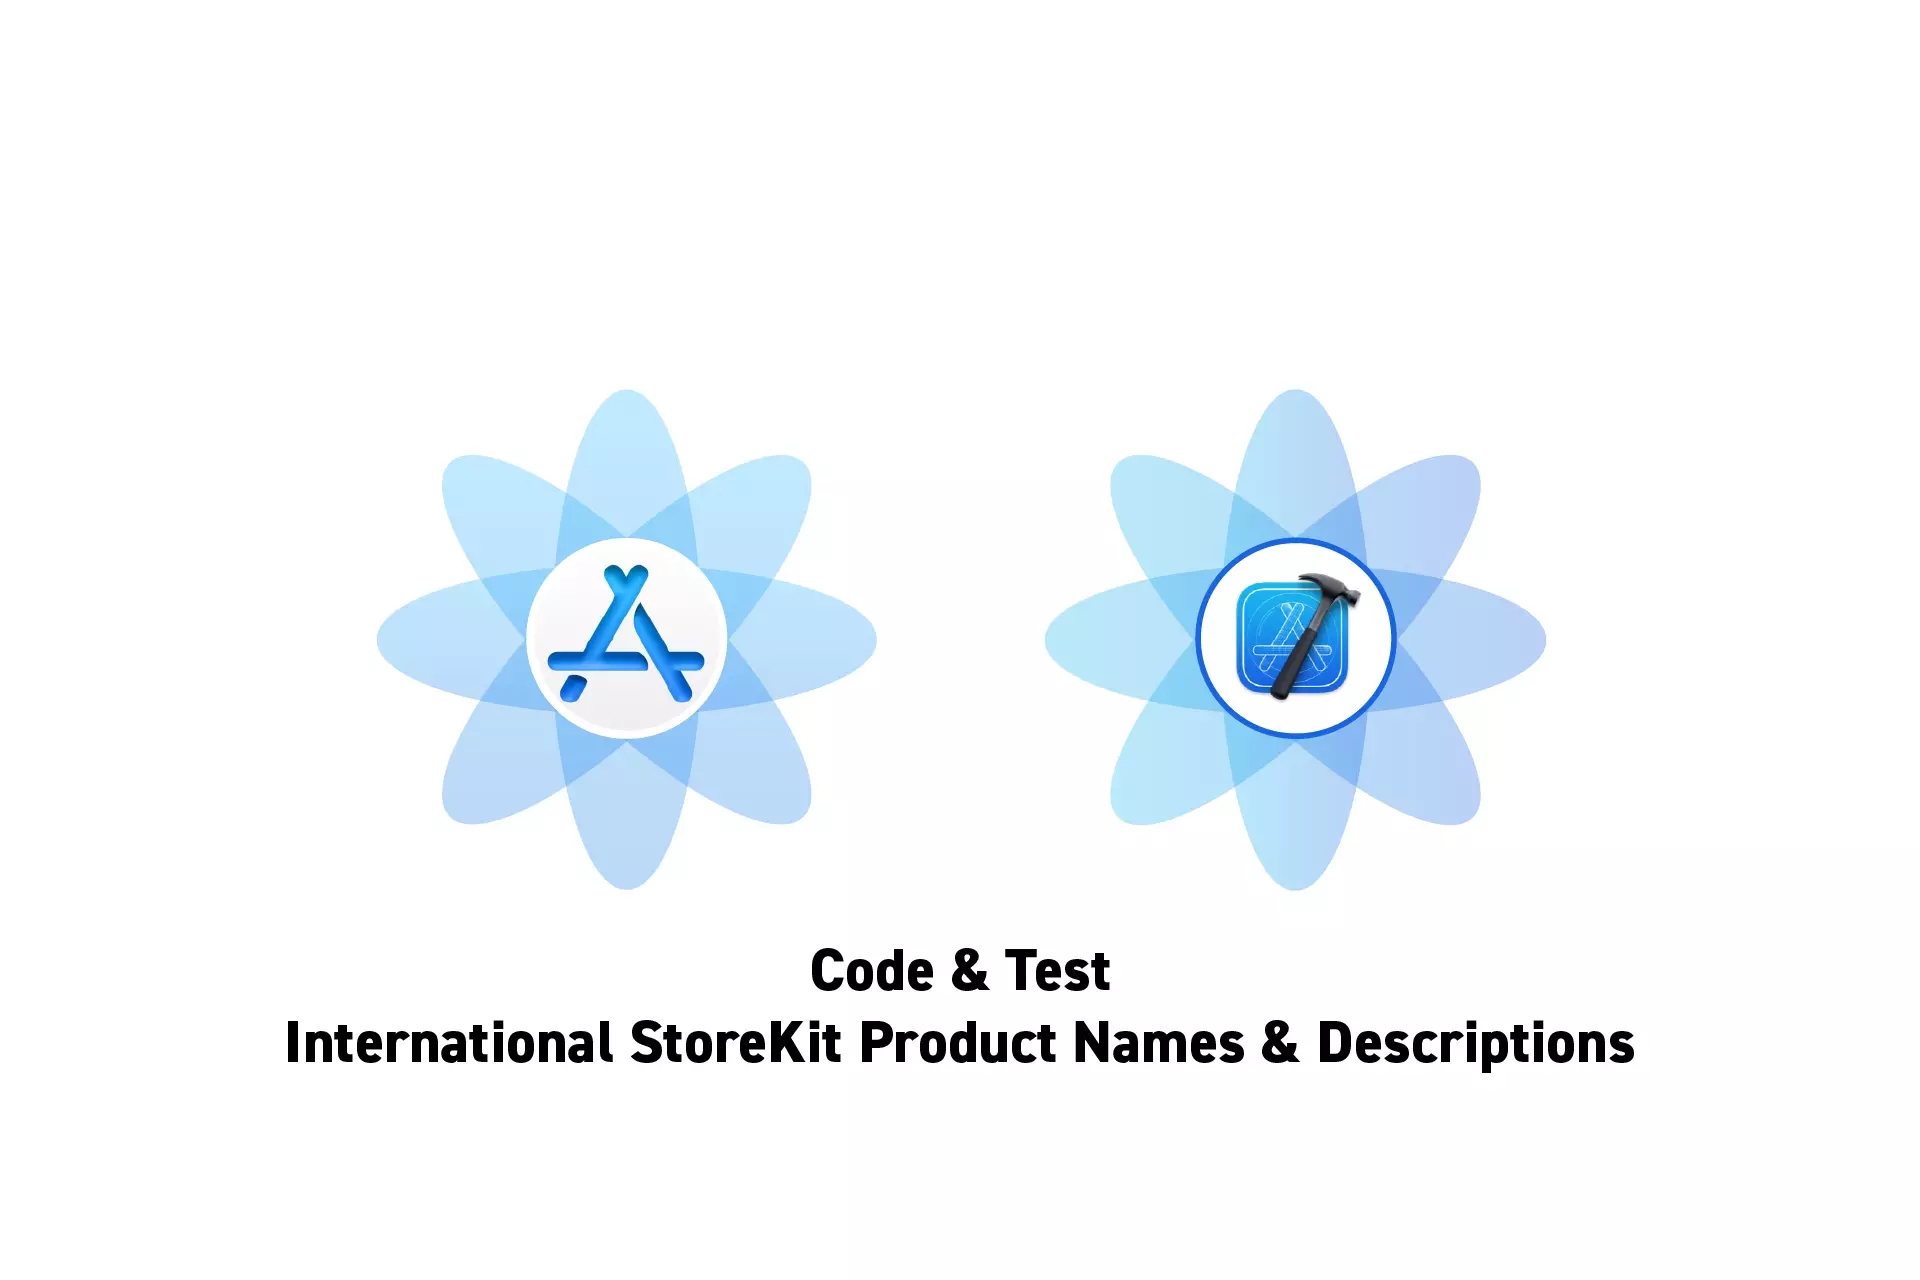 Two flowers that represent StoreKit and XCode side by side. Beneath them sits the text “Code & Test International StoreKit Product Names & Descriptions.”